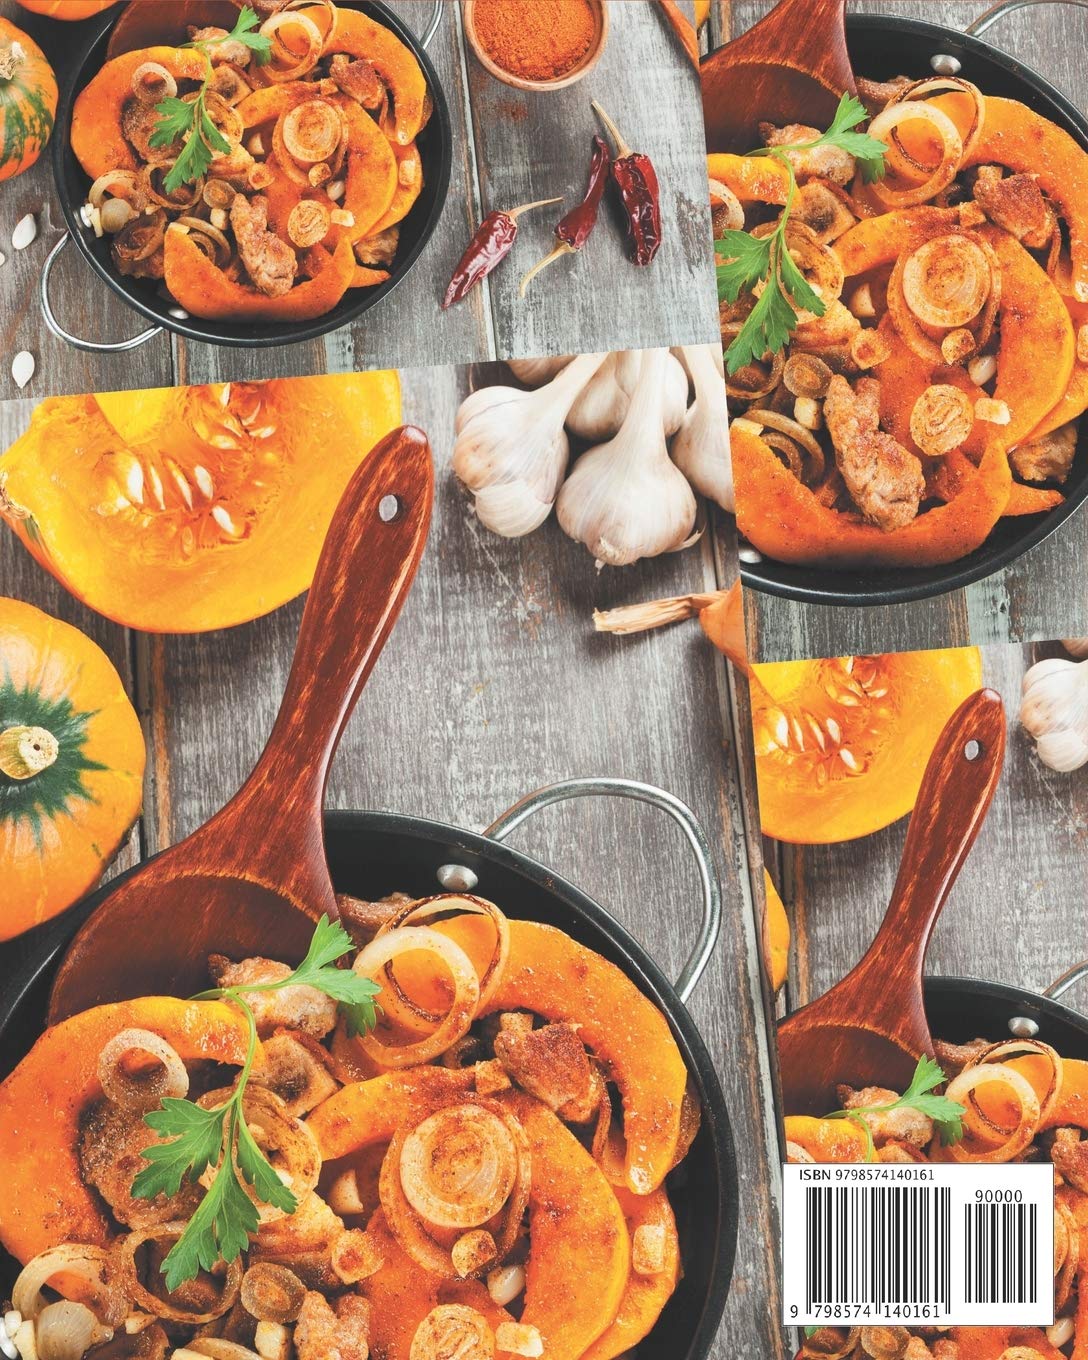 185 Fantastic Fall Recipes: A Highly Recommended Fall Cookbook